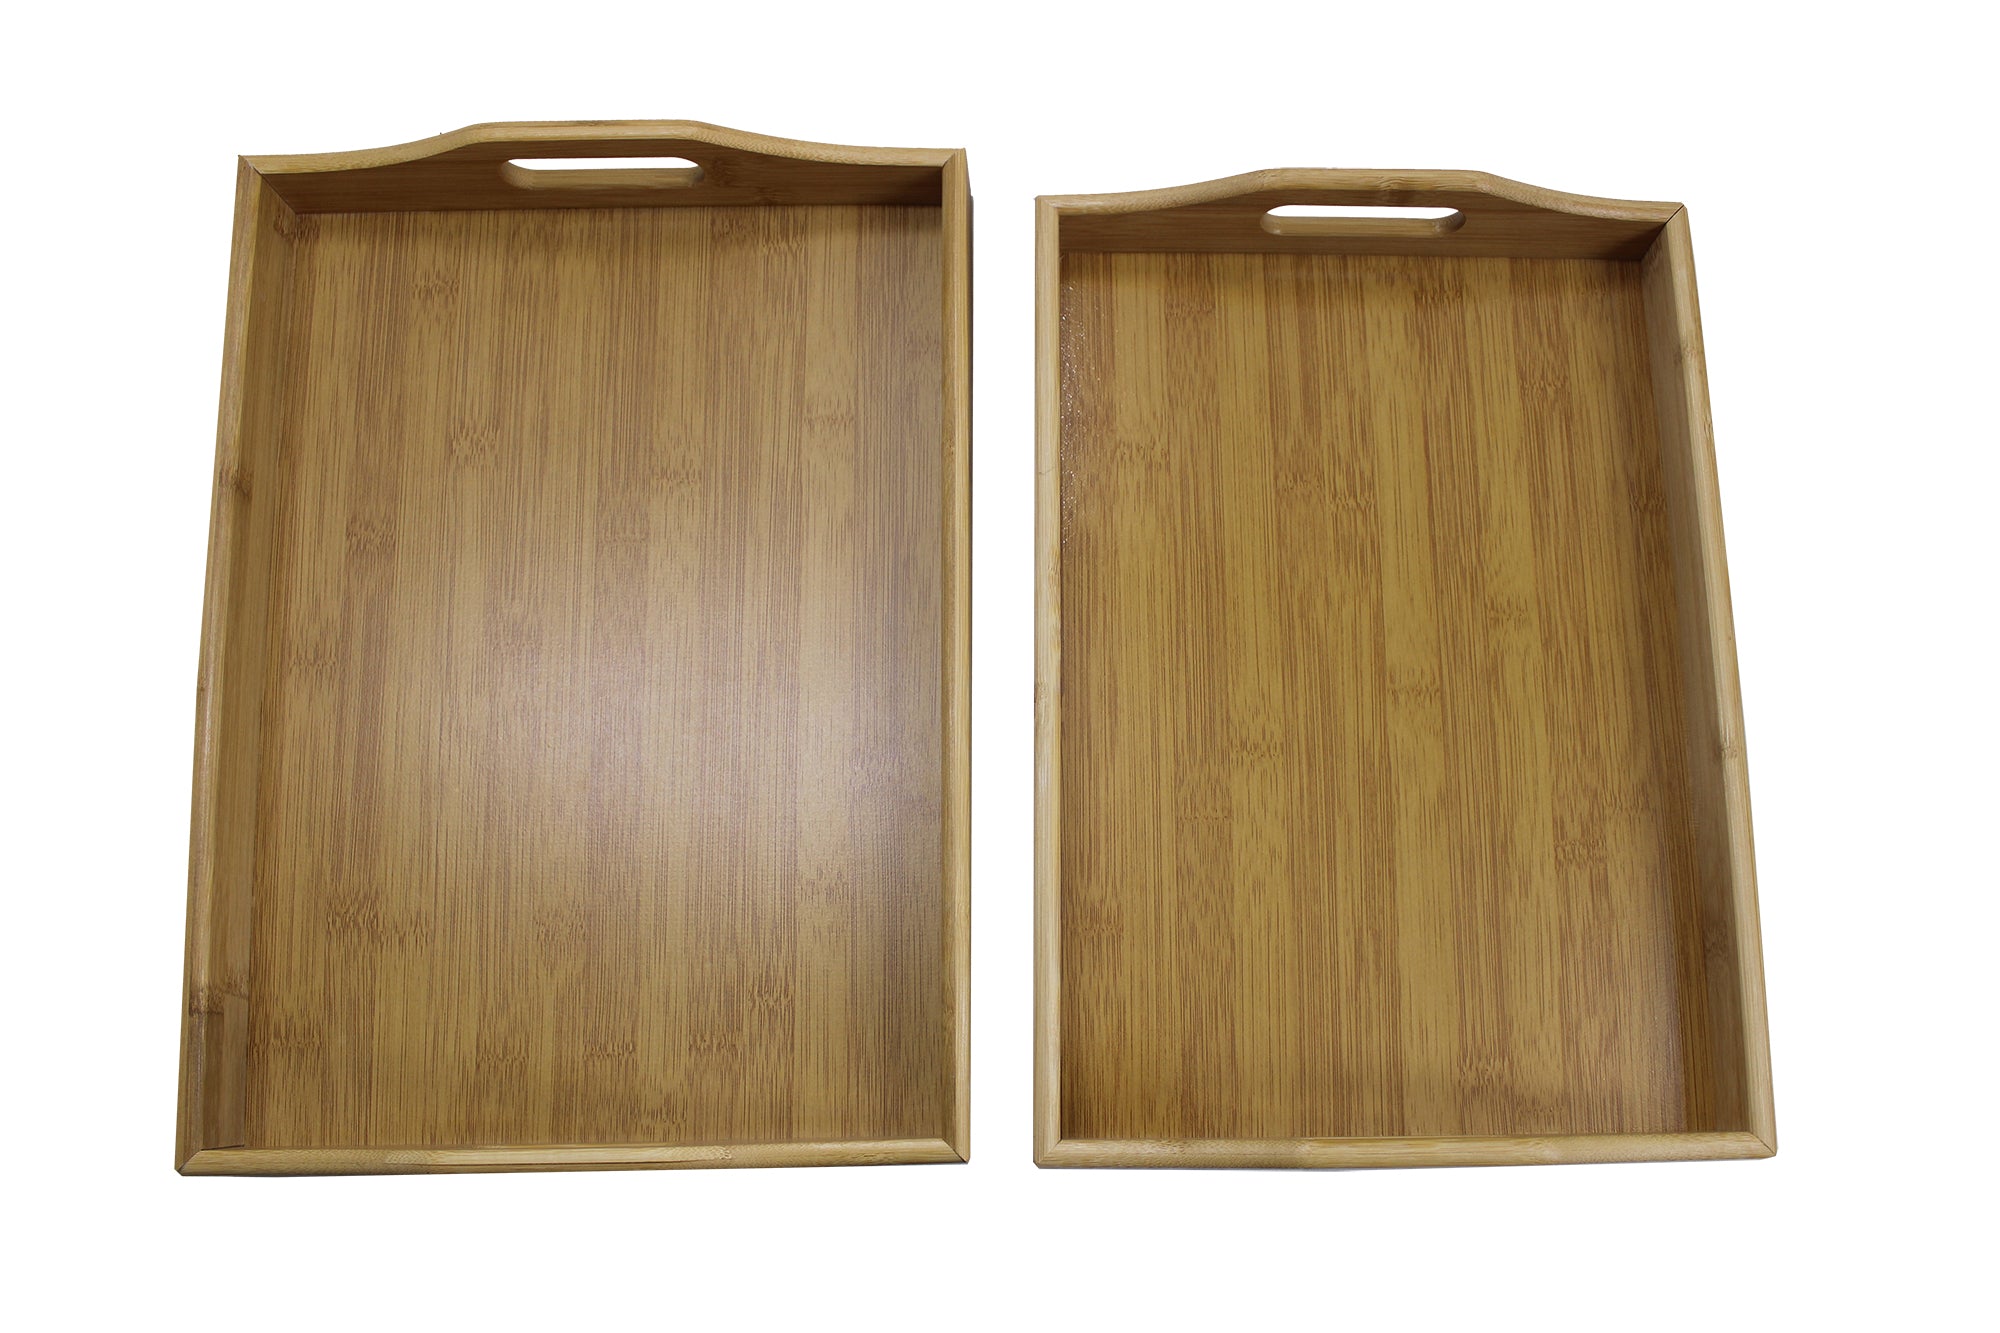 2 Piece Bamboo Serving Tray with  Handle Set - 39 x 29 and 36 x 26cm